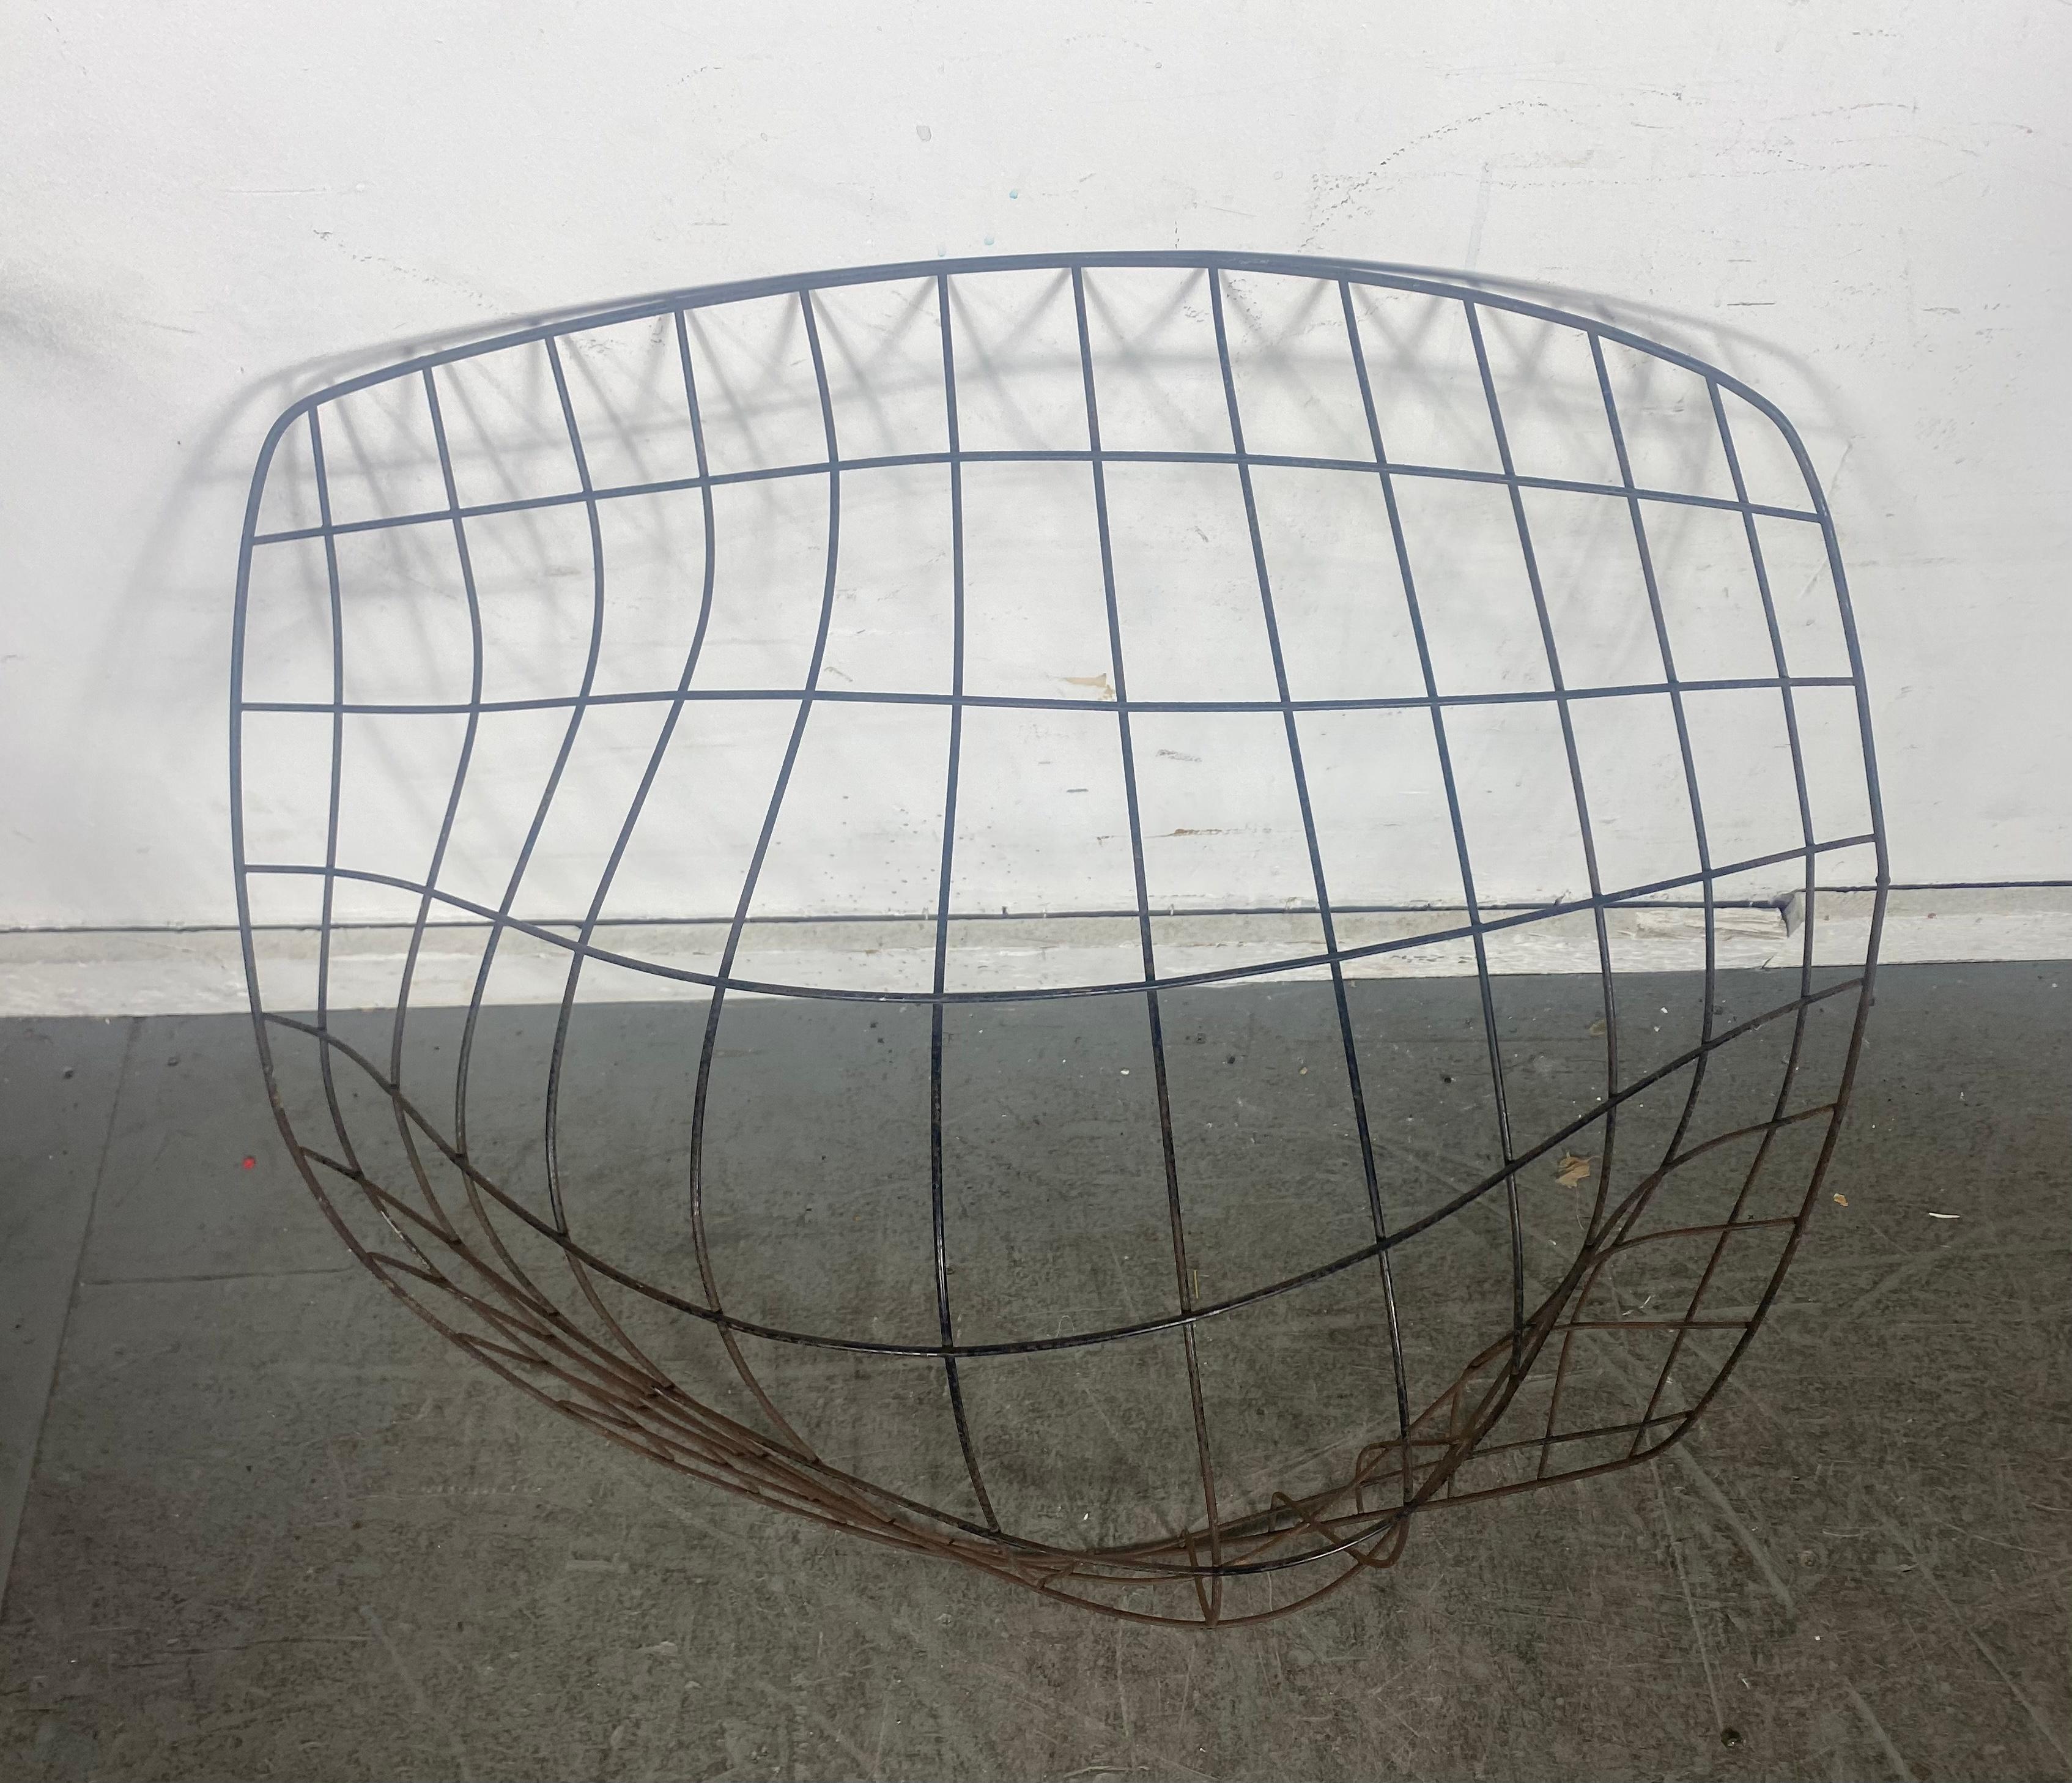 Provenance: Wright Modernist 20th Century, auction 12/7/2003,

Bertoia worked with the Eames' in California in the late 1940s to develop their wire form chairs. His involvement led to further experiments in wire furniture forms, and he produced